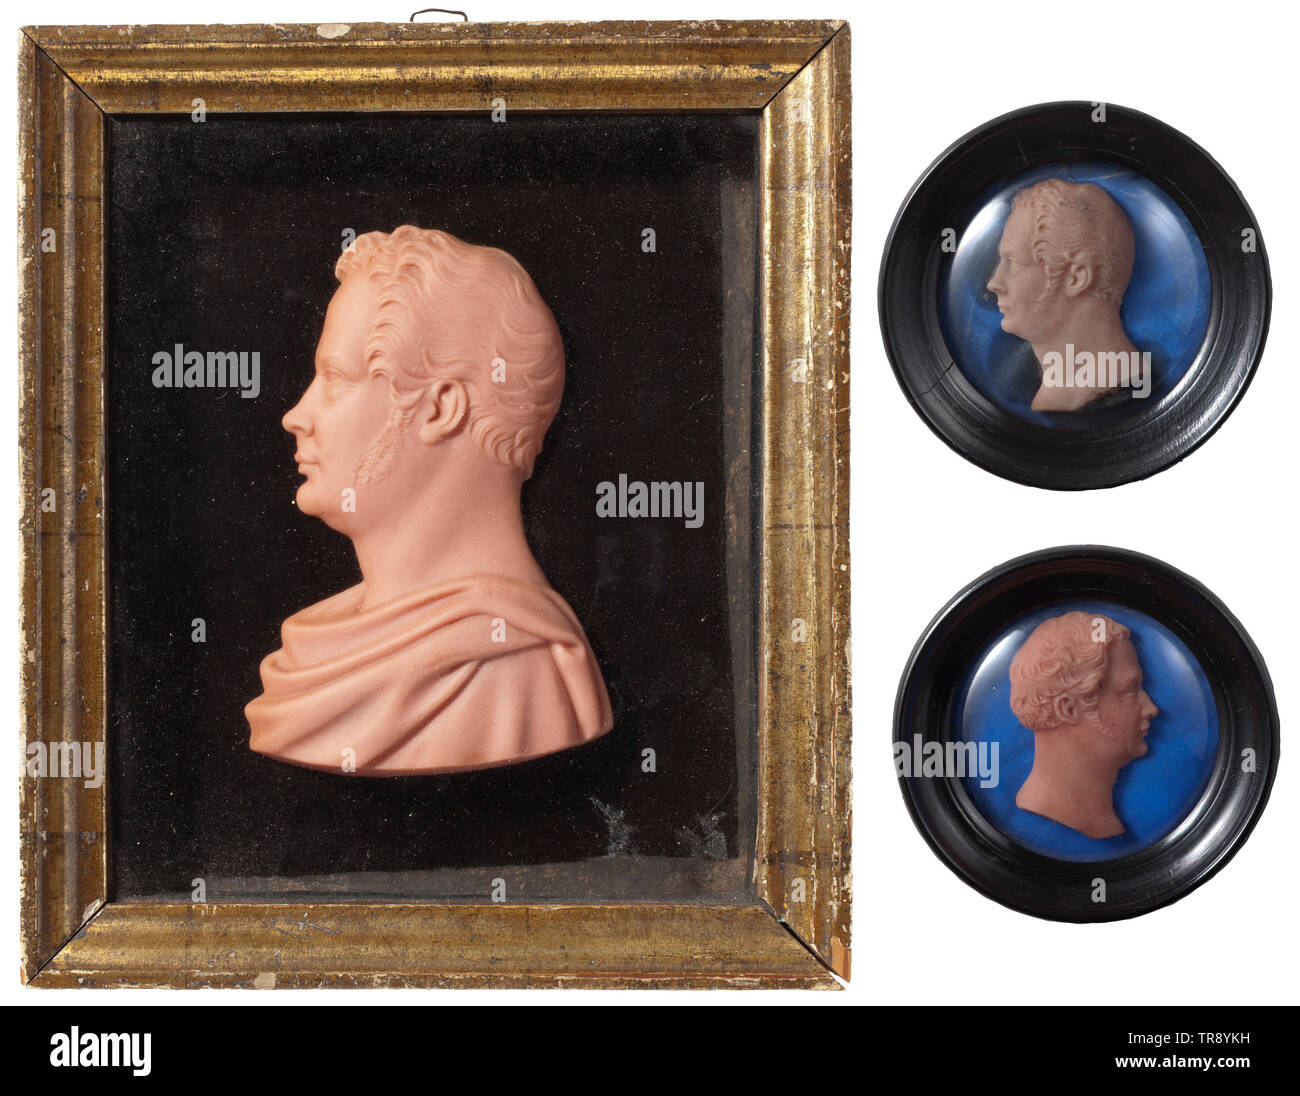 King Friedrich Wilhelm IV (1795 - 1861) - three wax bossings Profiles of the king turned to the right respectively to the left, made from pale pink wax, inscribed on the reverse side 'C. Hettler'. Each in a glassed profiled frame (round respectively rectangular). Dimensions with frame 17.5 x 20.5 cm respectively diameter 8.3 cm. historic, historical, Prussian, Prussia, German, Germany, militaria, military, object, objects, stills, clipping, clippings, cut out, cut-out, cut-outs, 19th century, Additional-Rights-Clearance-Info-Not-Available Stock Photo